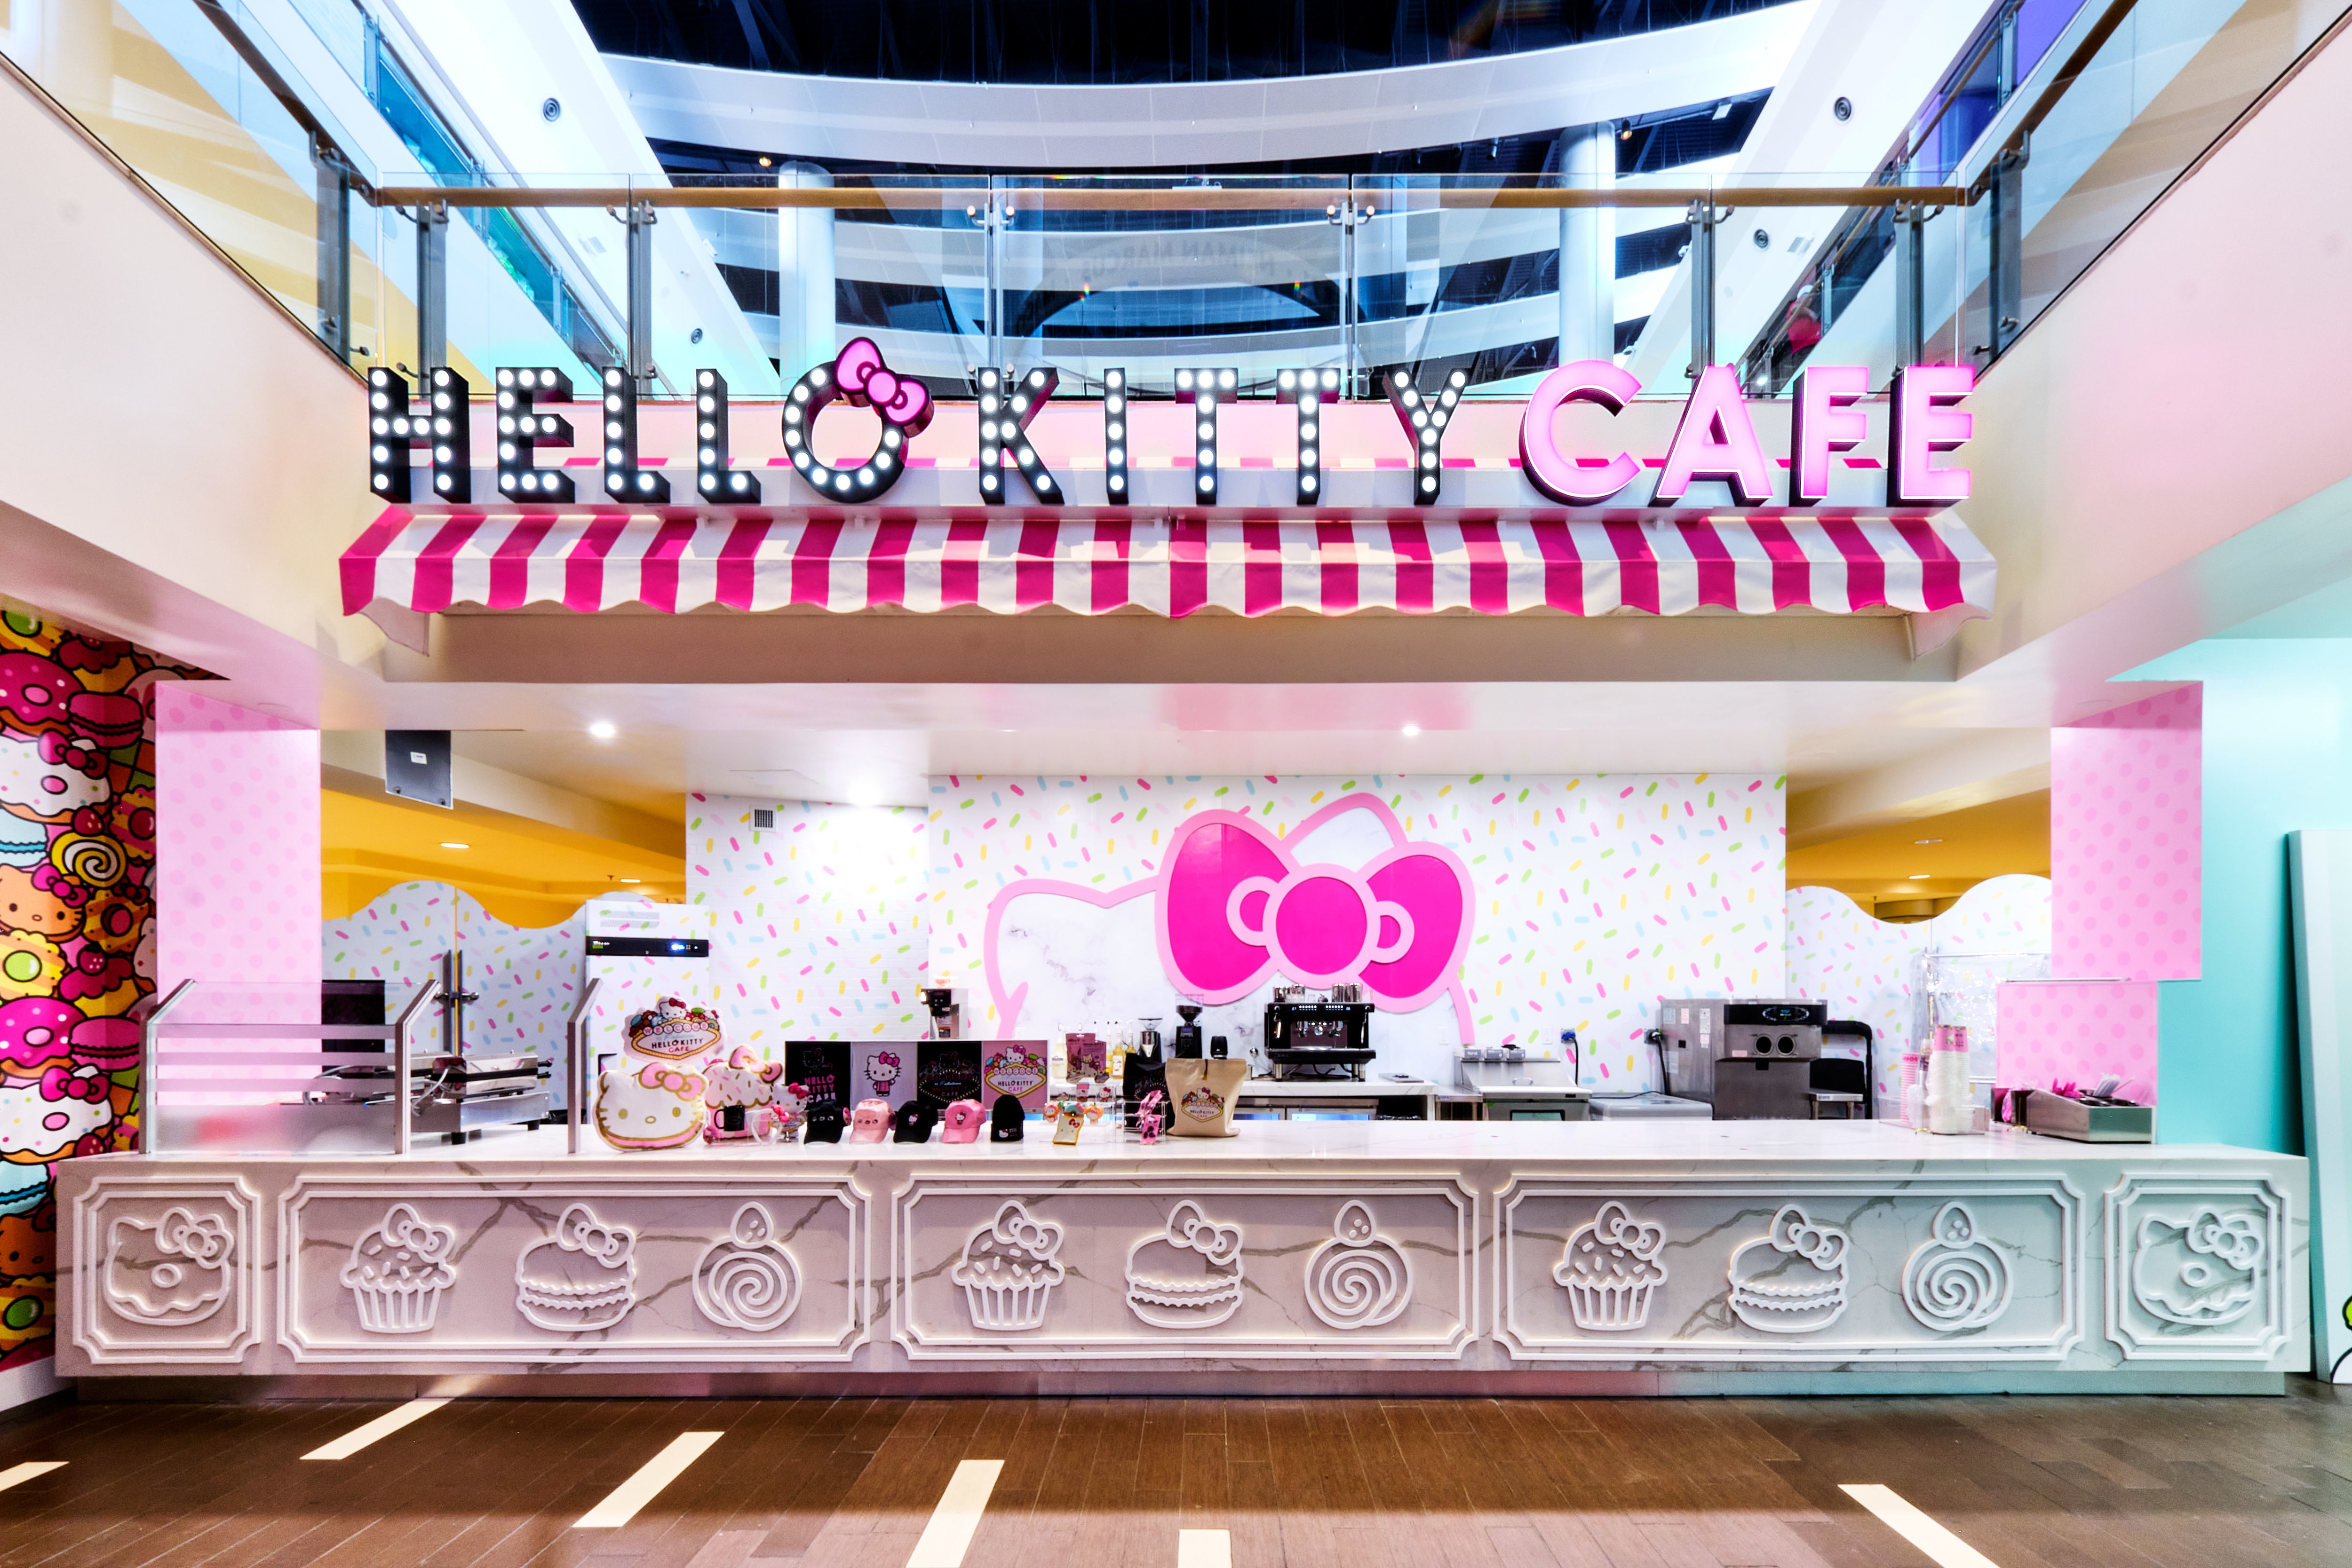 First Hello Kitty 'pop-up' cafe opens in Irvine – Orange County Register